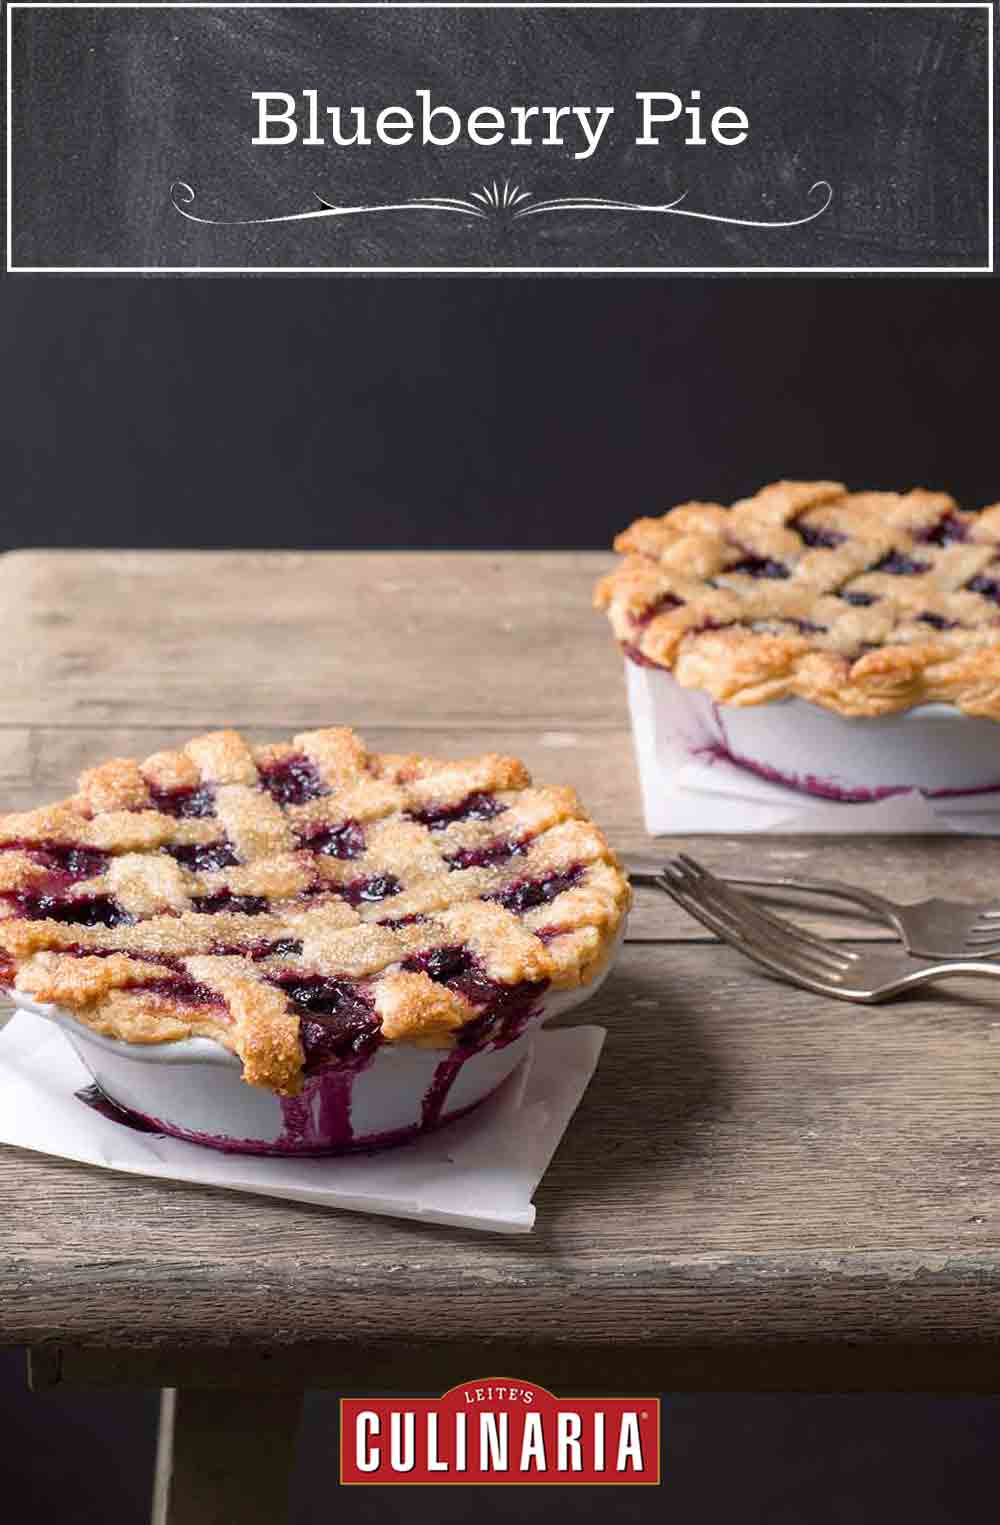 Two individual size blueberry pies on a wooden table.